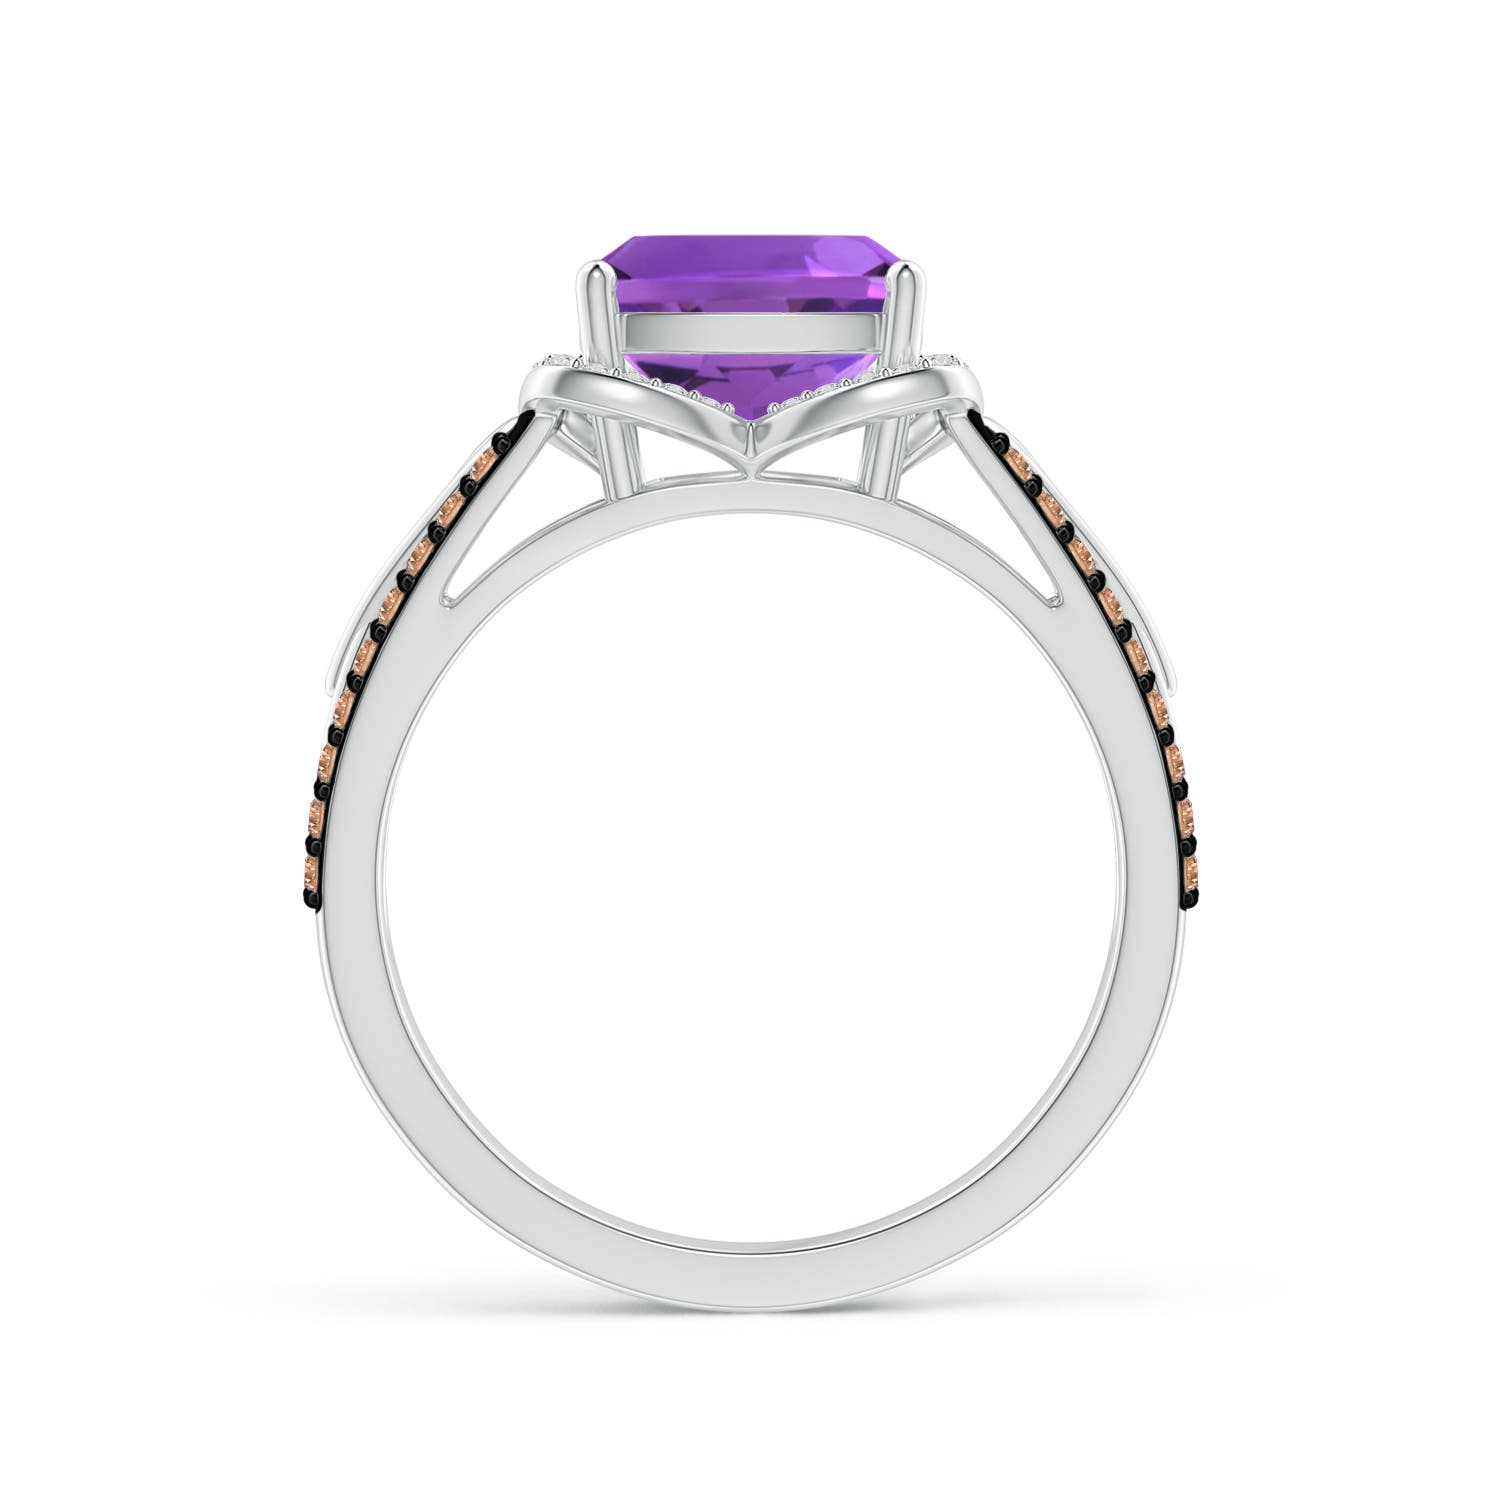 AAA - Amethyst / 2.6 CT / 14 KT White Gold